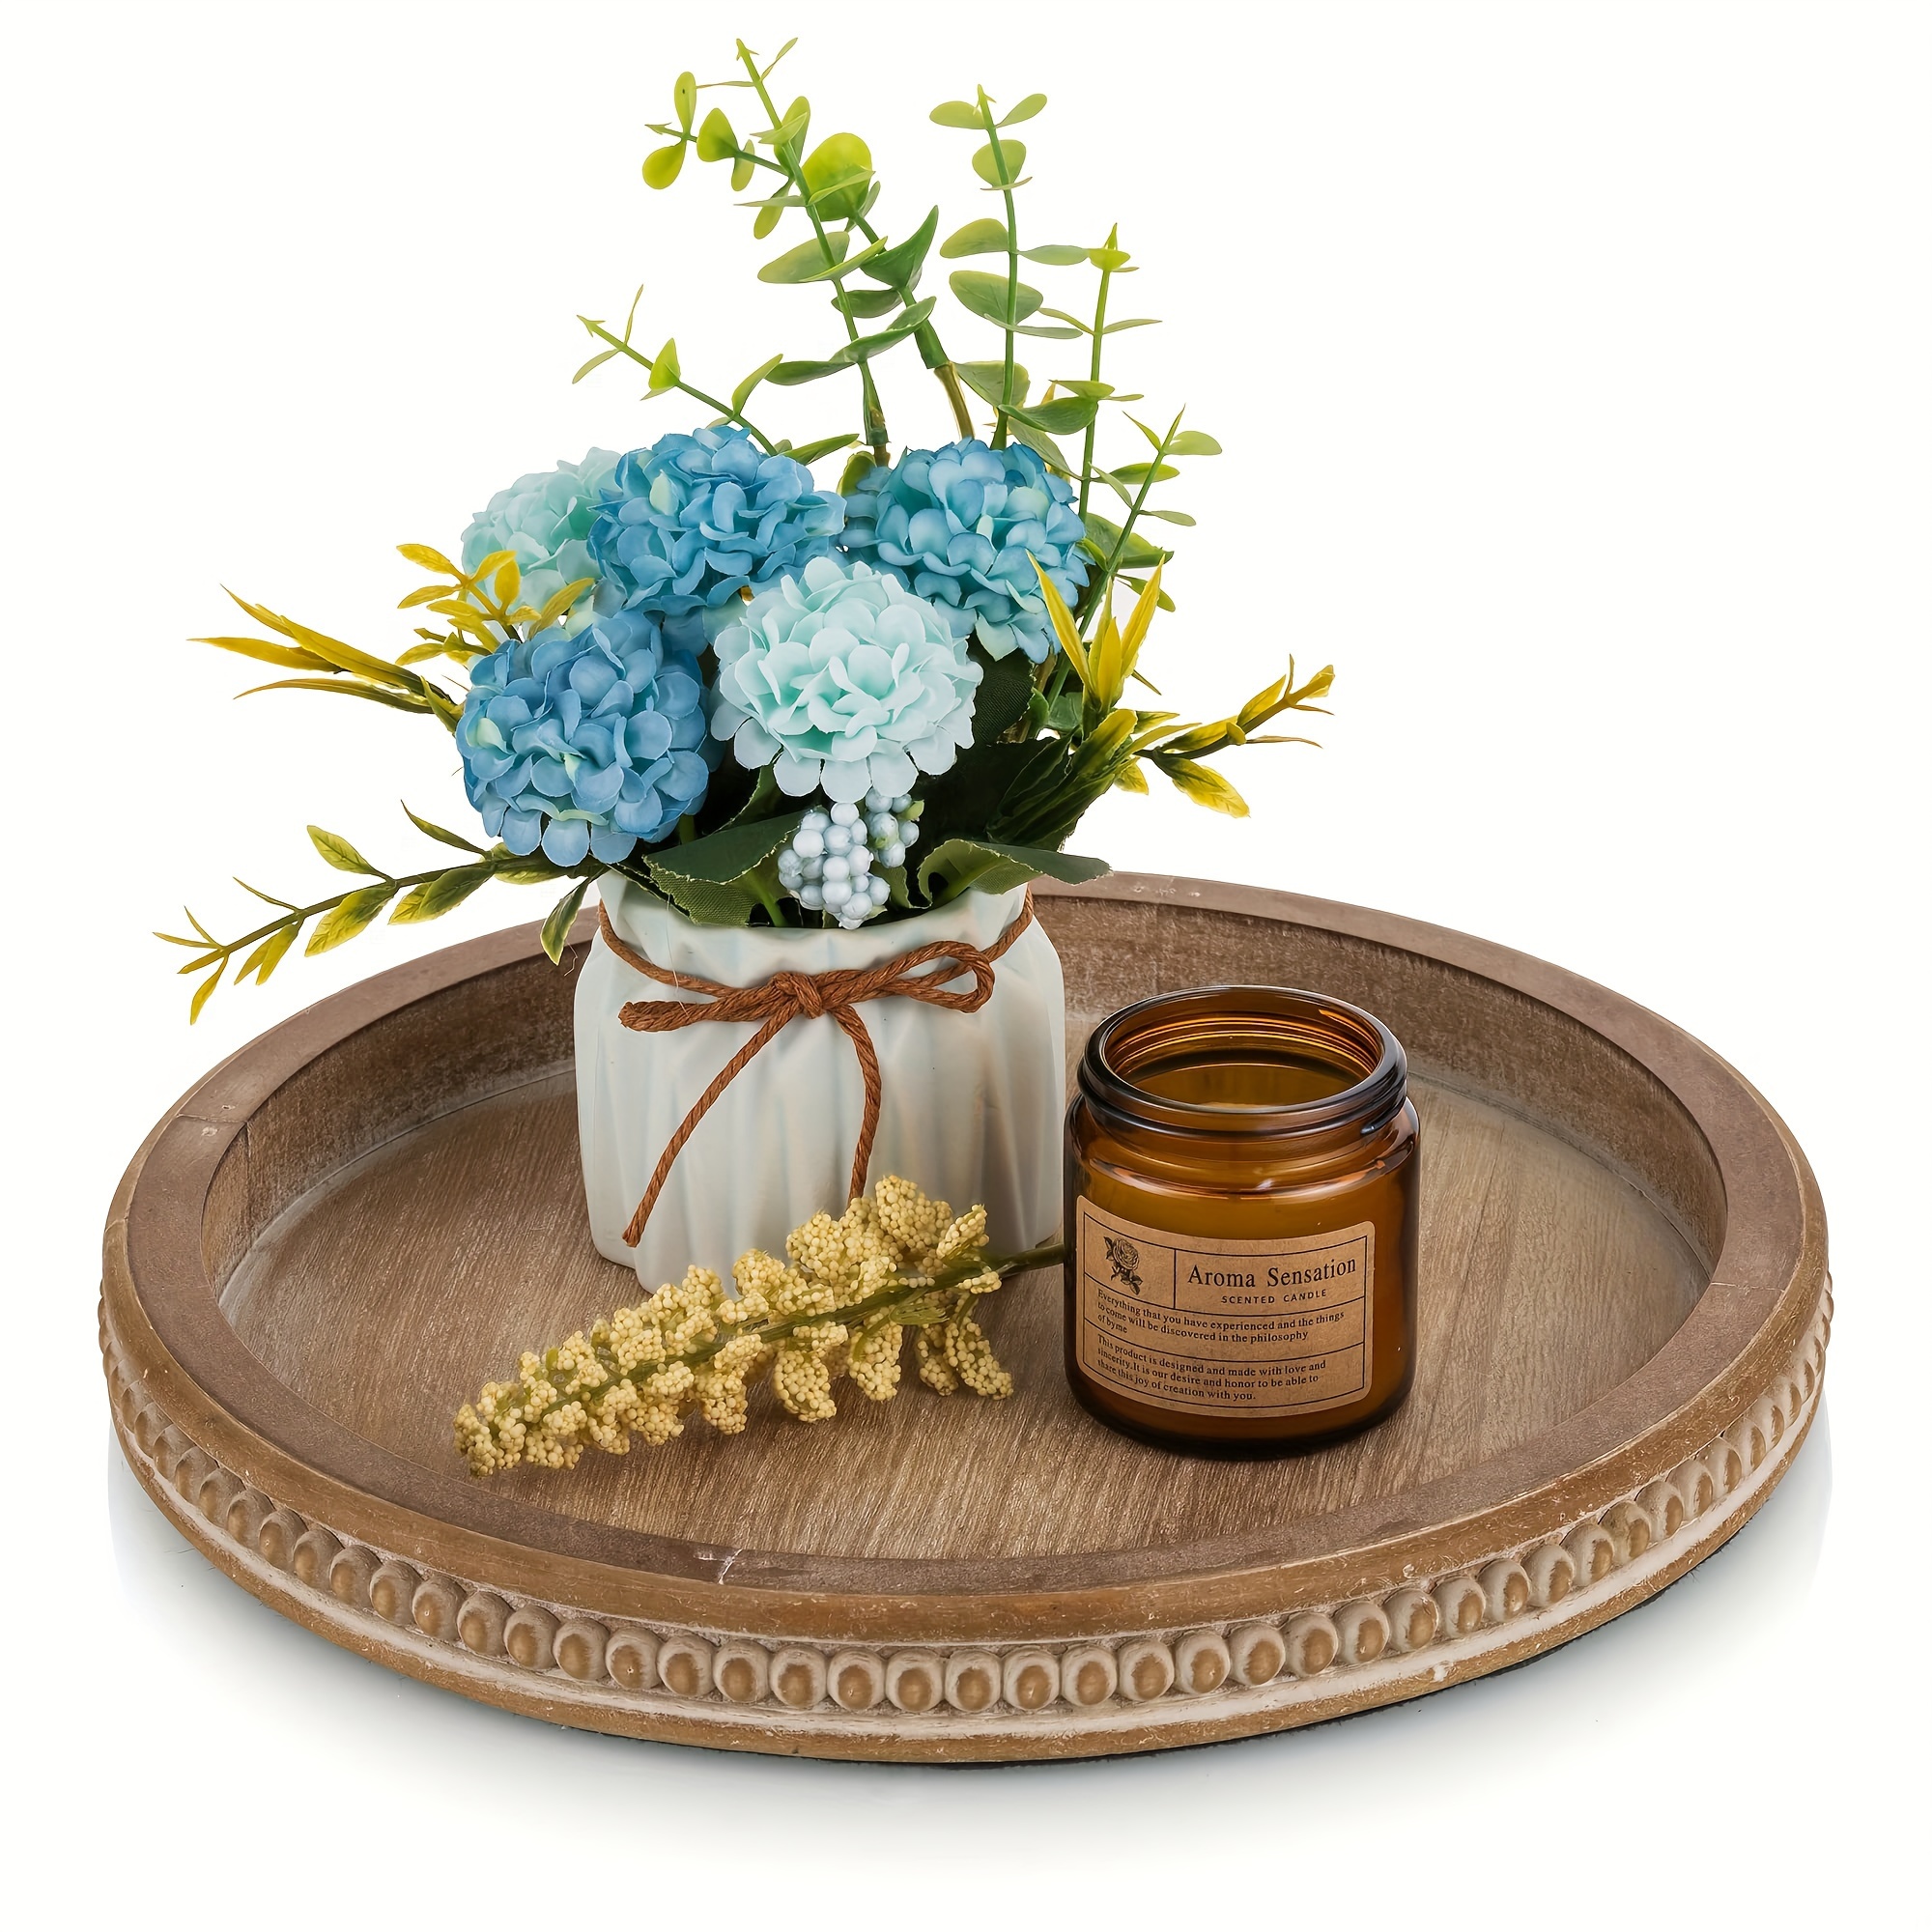 Round Wood Tray/w Wood Bead Garland - 13 Decorative Trays for Home Decor -  Round Wooden Tray with Handles - Wooden Round Tray for Kitchen Counter.